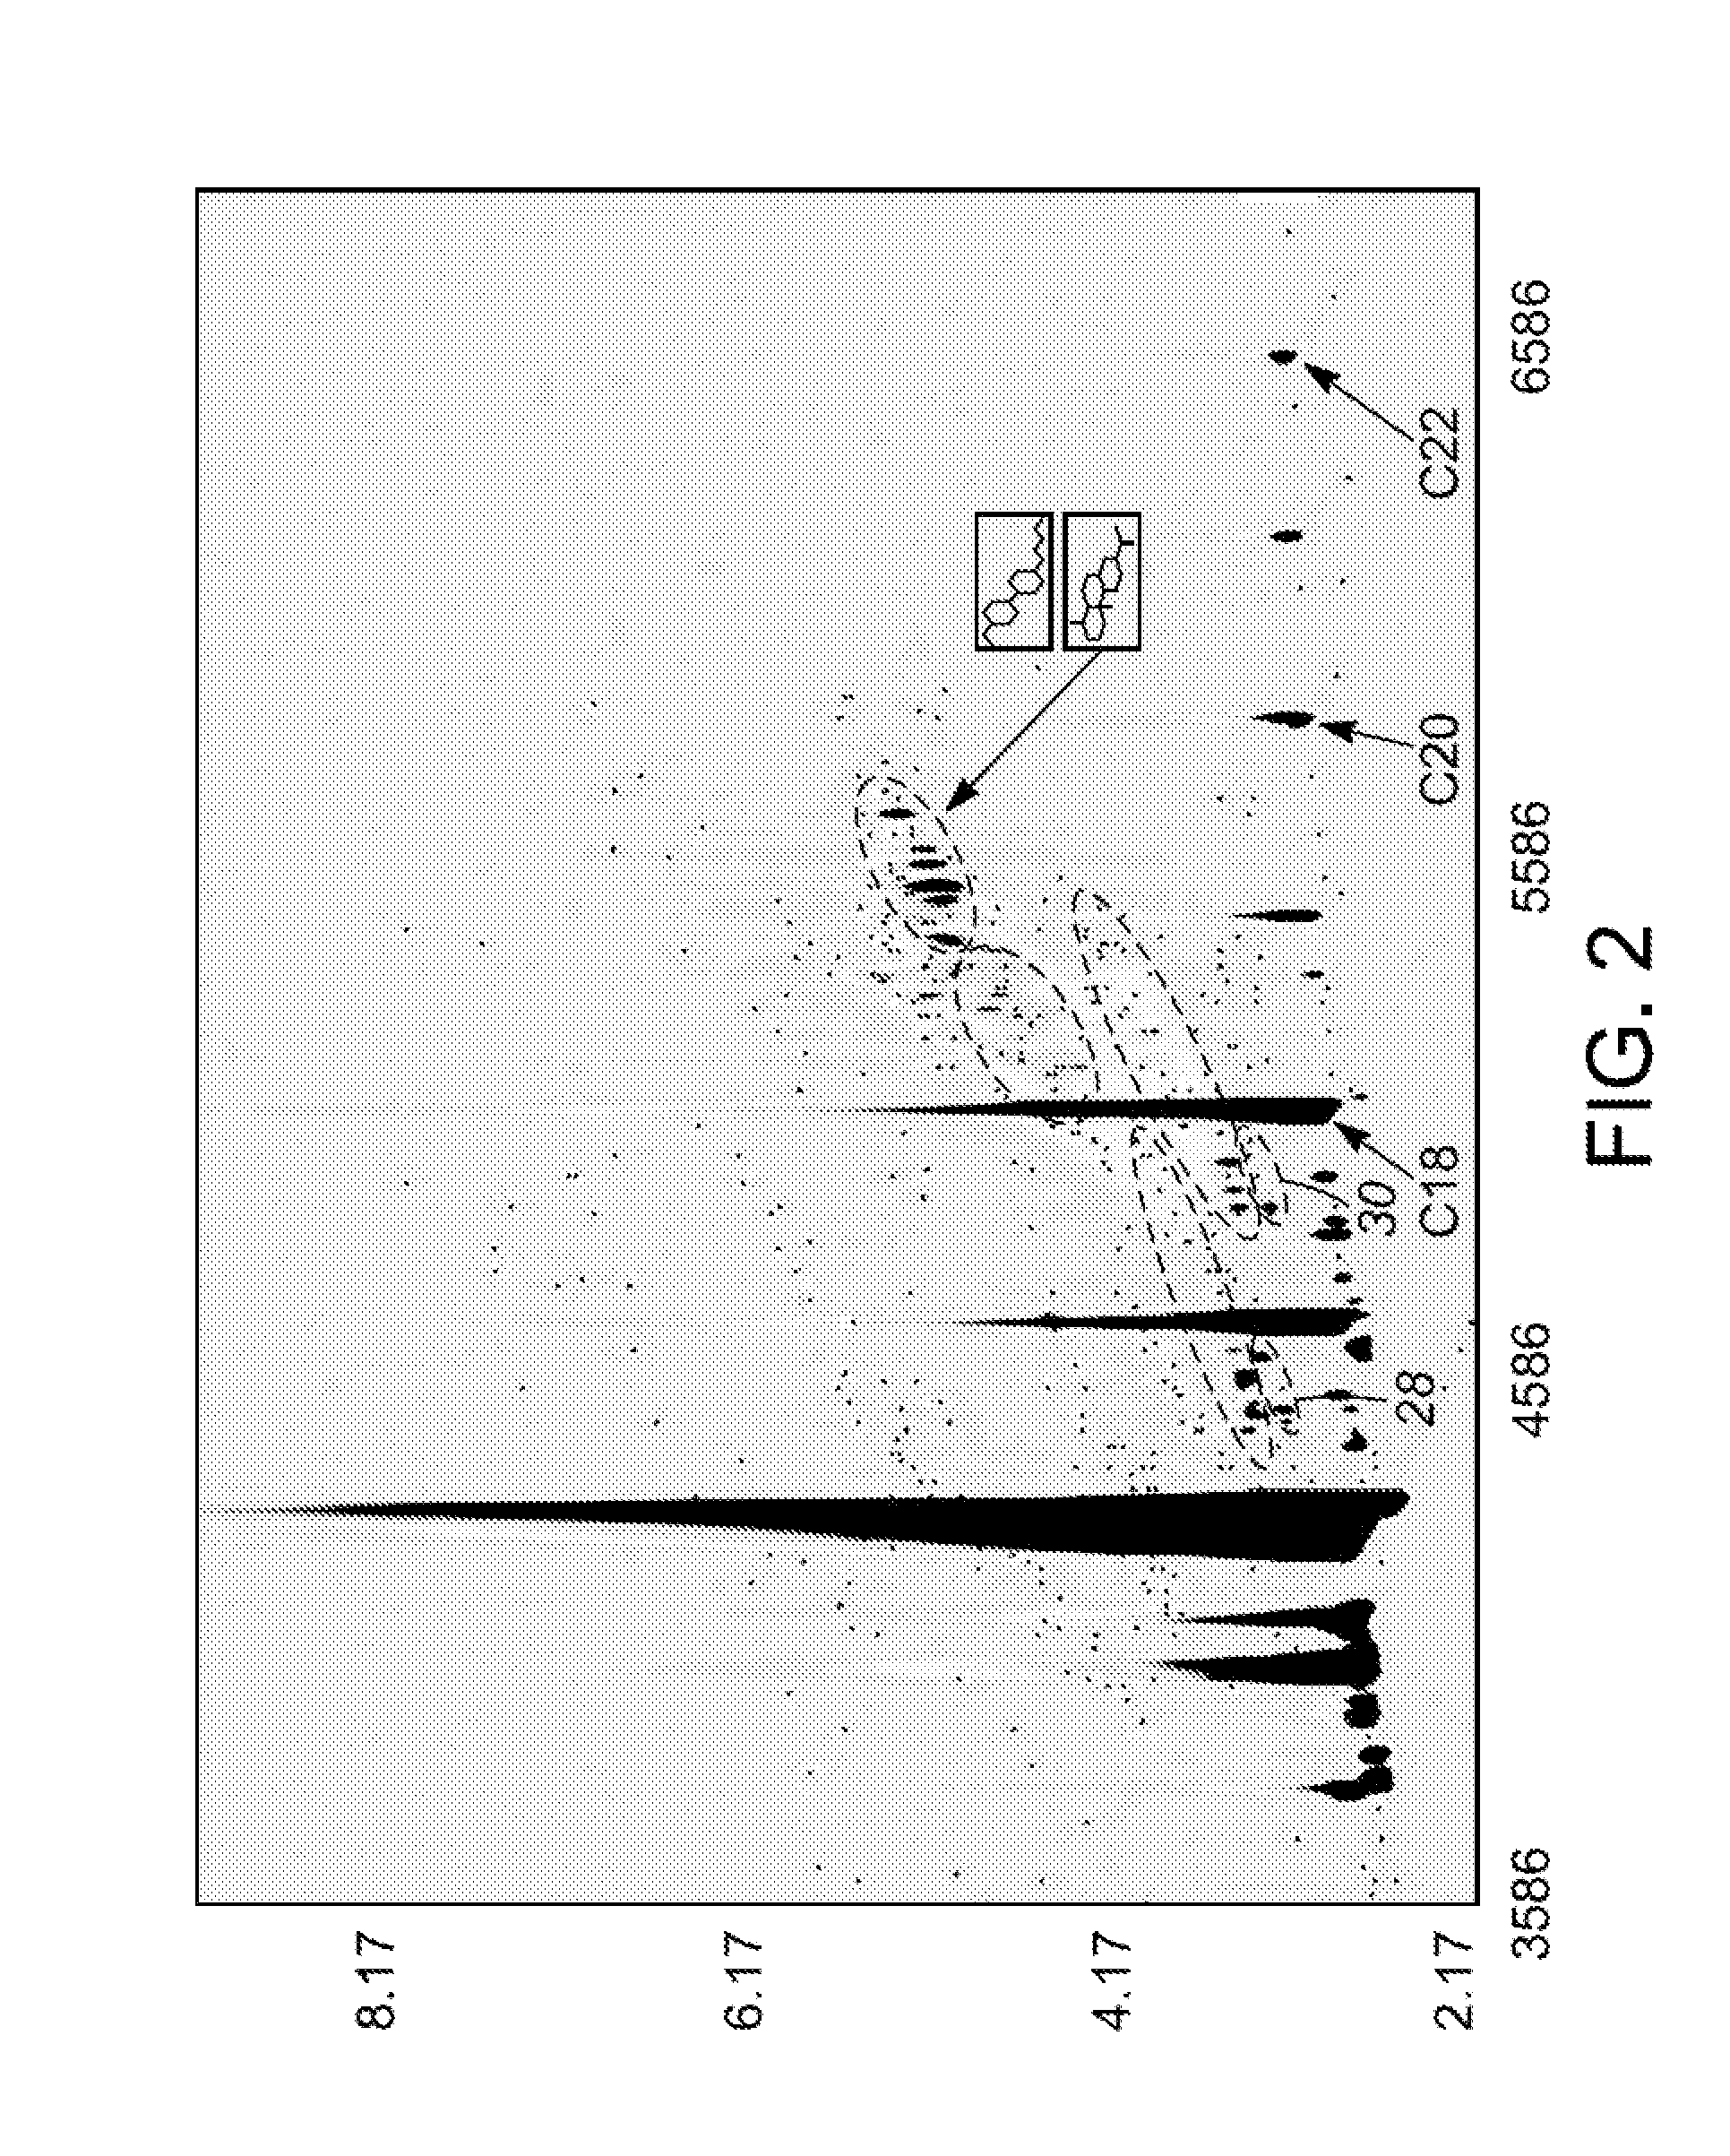 Methods for evaluating green diesel fuel compositions